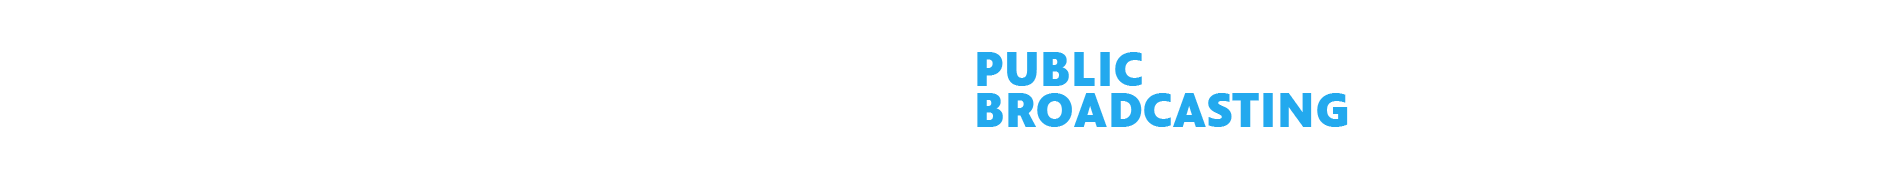 Your Hometown PBS station